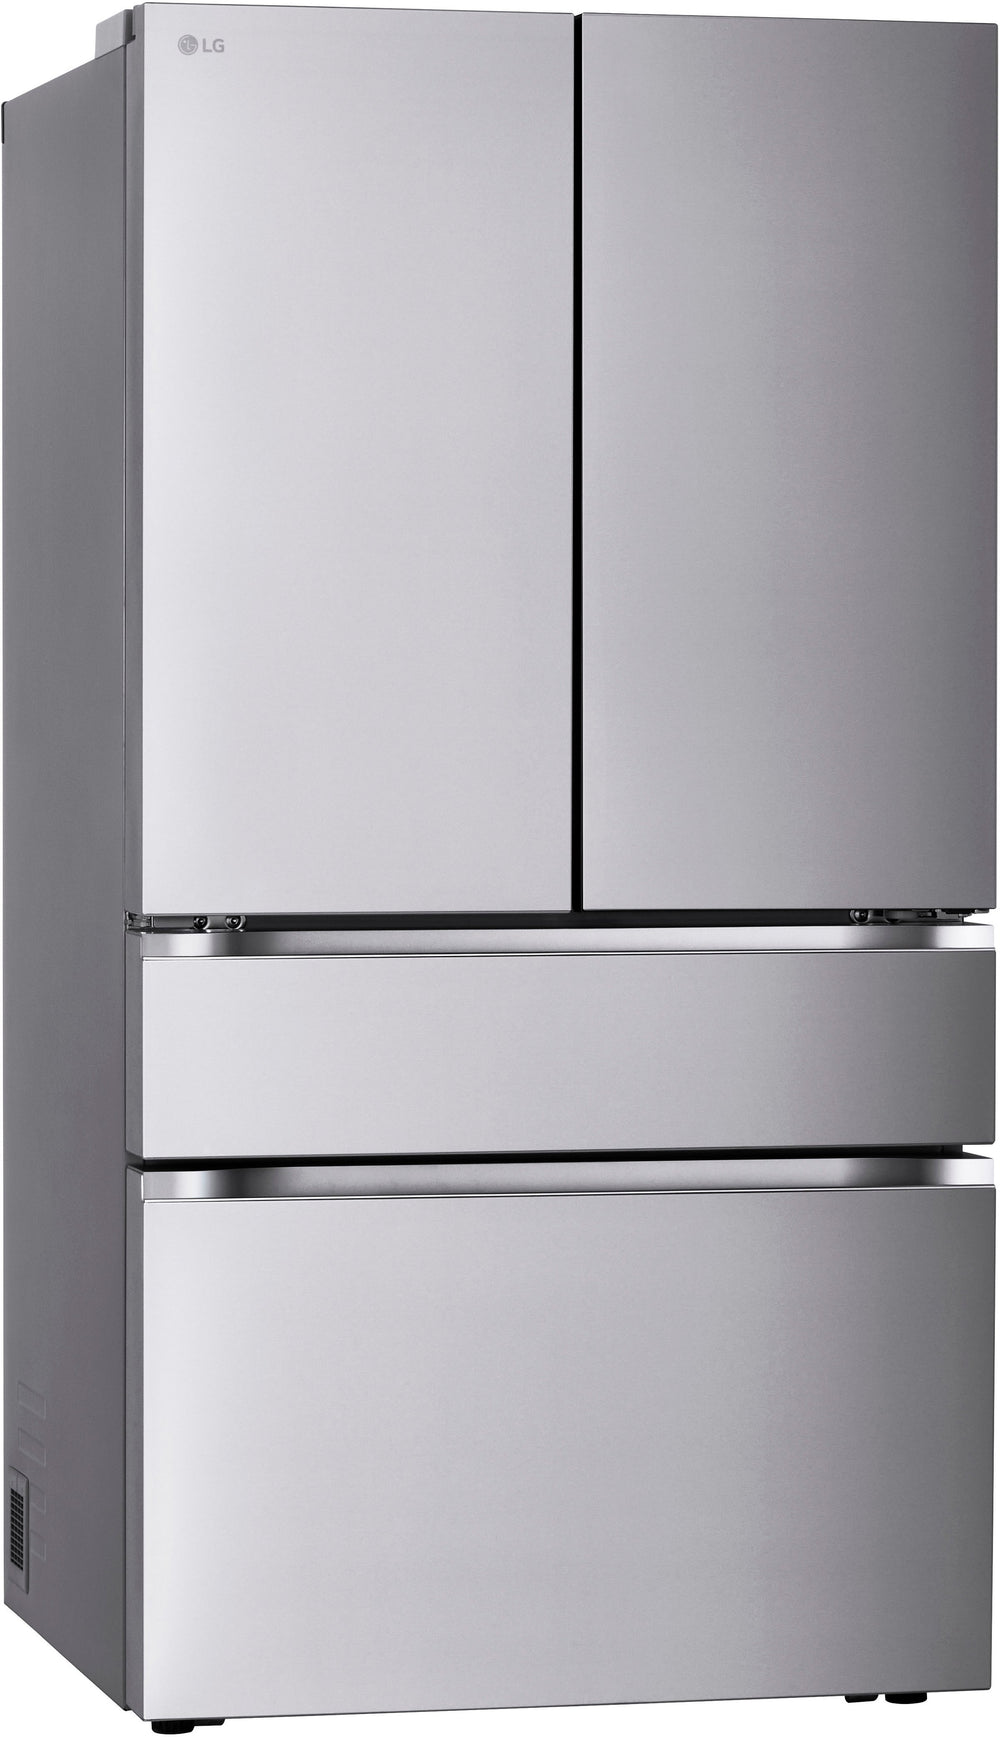 LG - 29.6 Cu. Ft. French Door Smart Refrigerator with Full-Convert Drawer - Stainless Steel_1